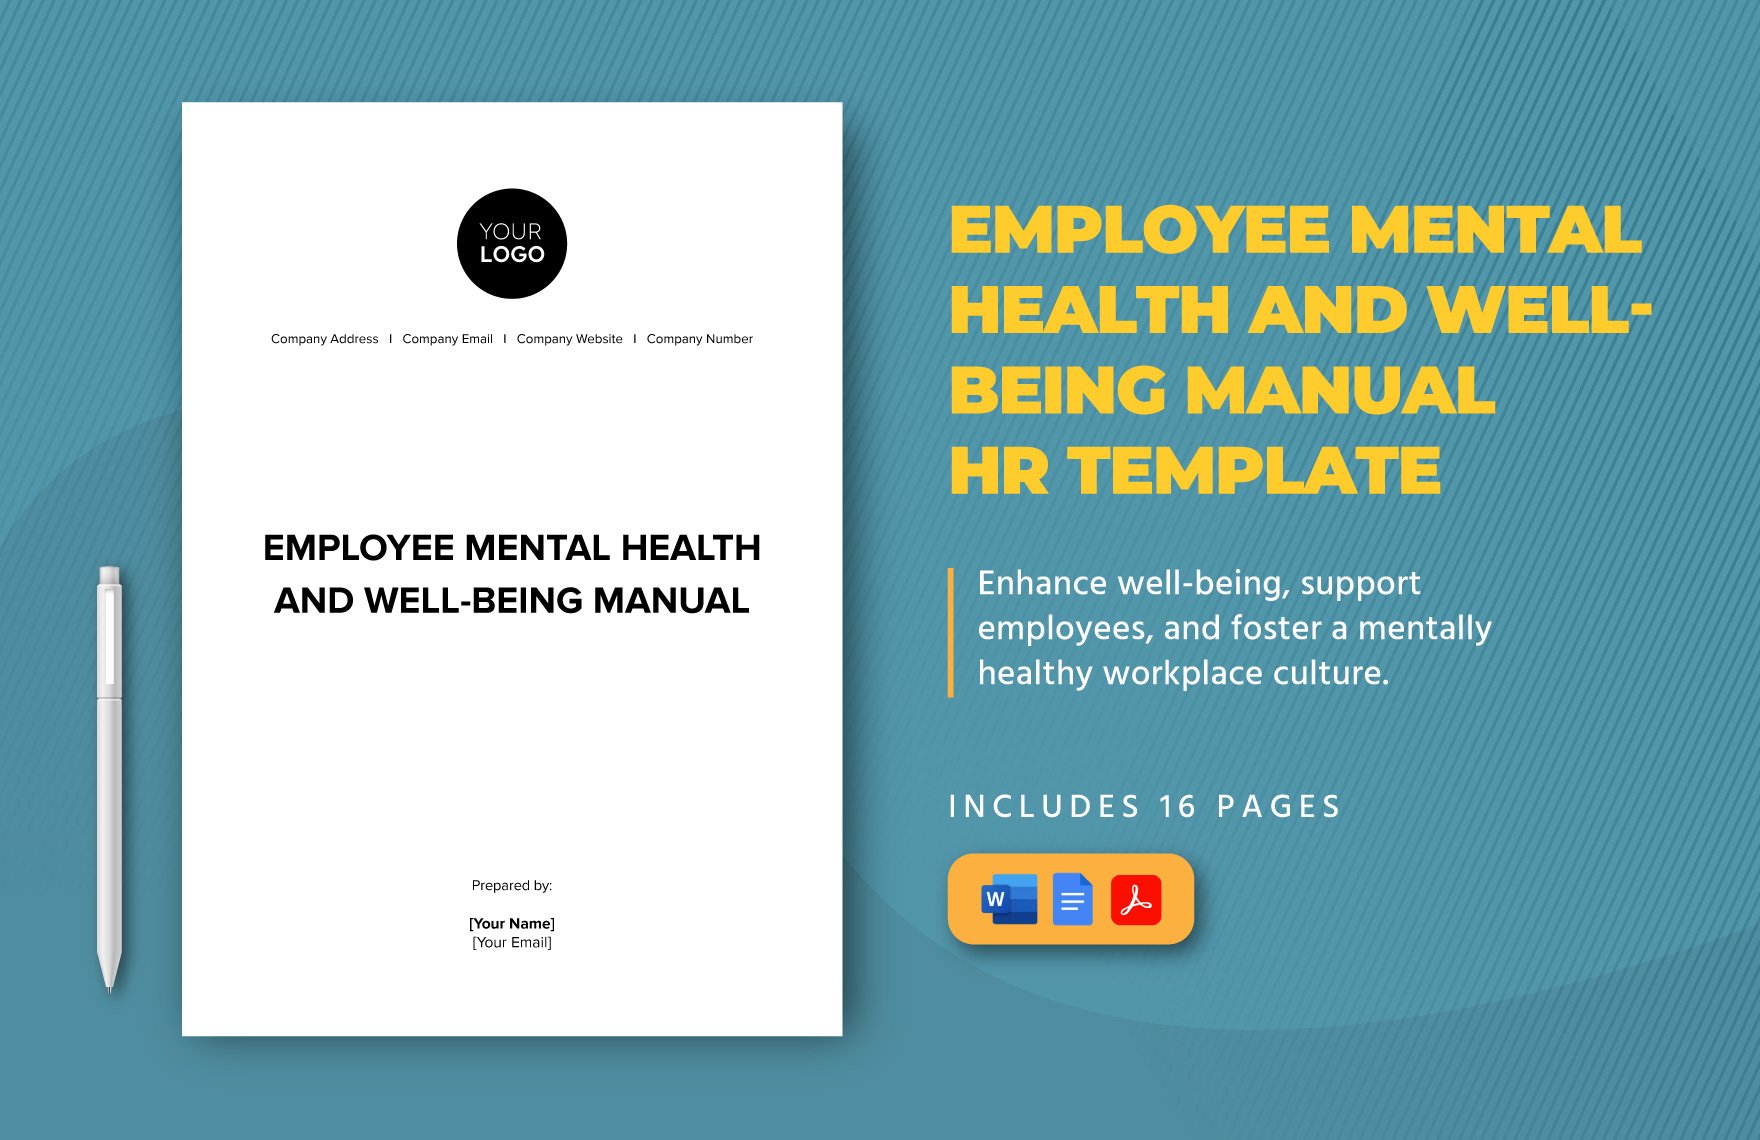 Employee Mental Health and Well-being Manual HR Template